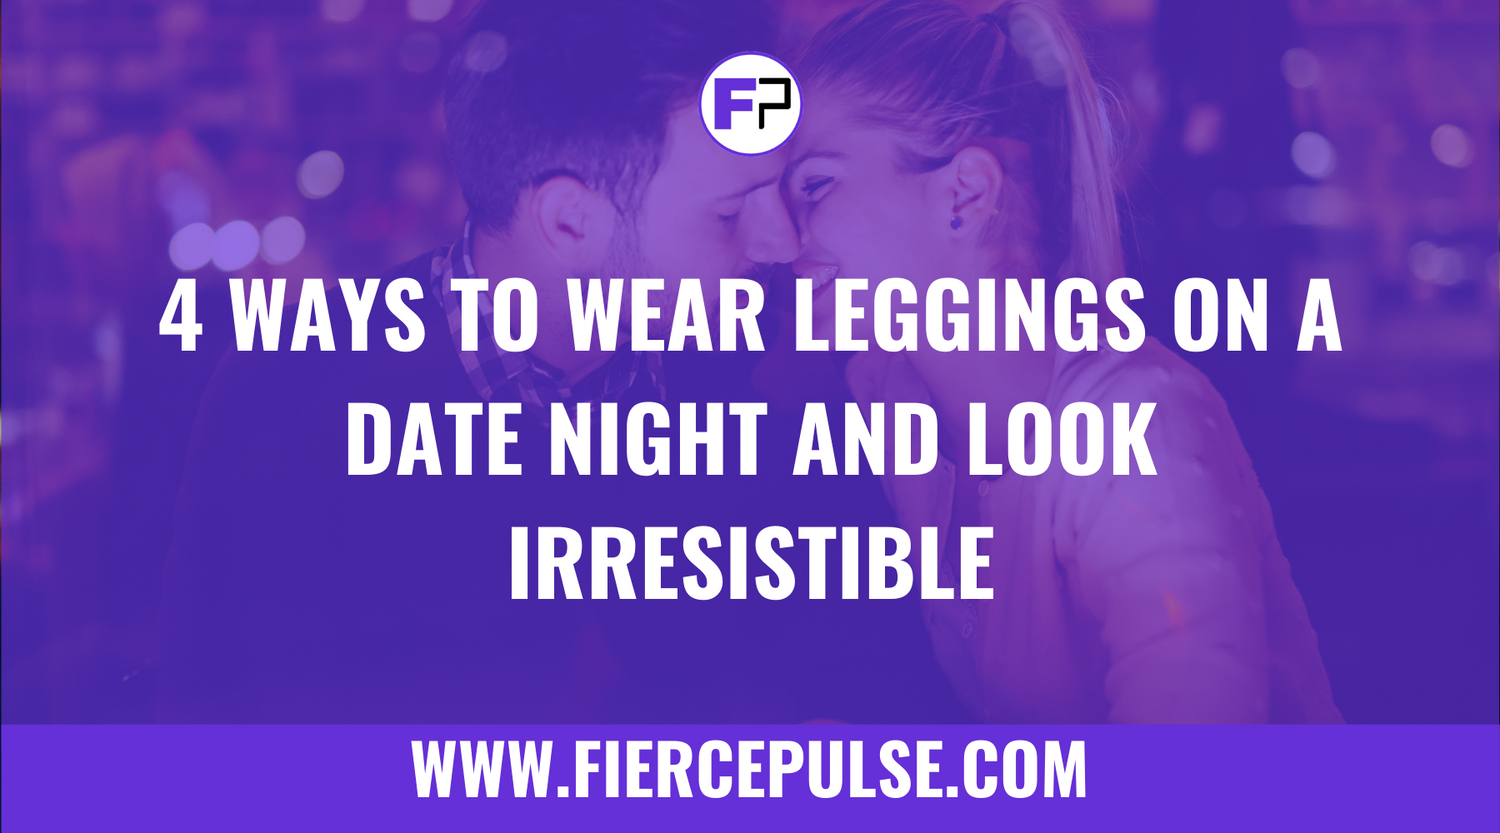 4 Ways To Wear Leggings On A Date Night And Look Irresistible